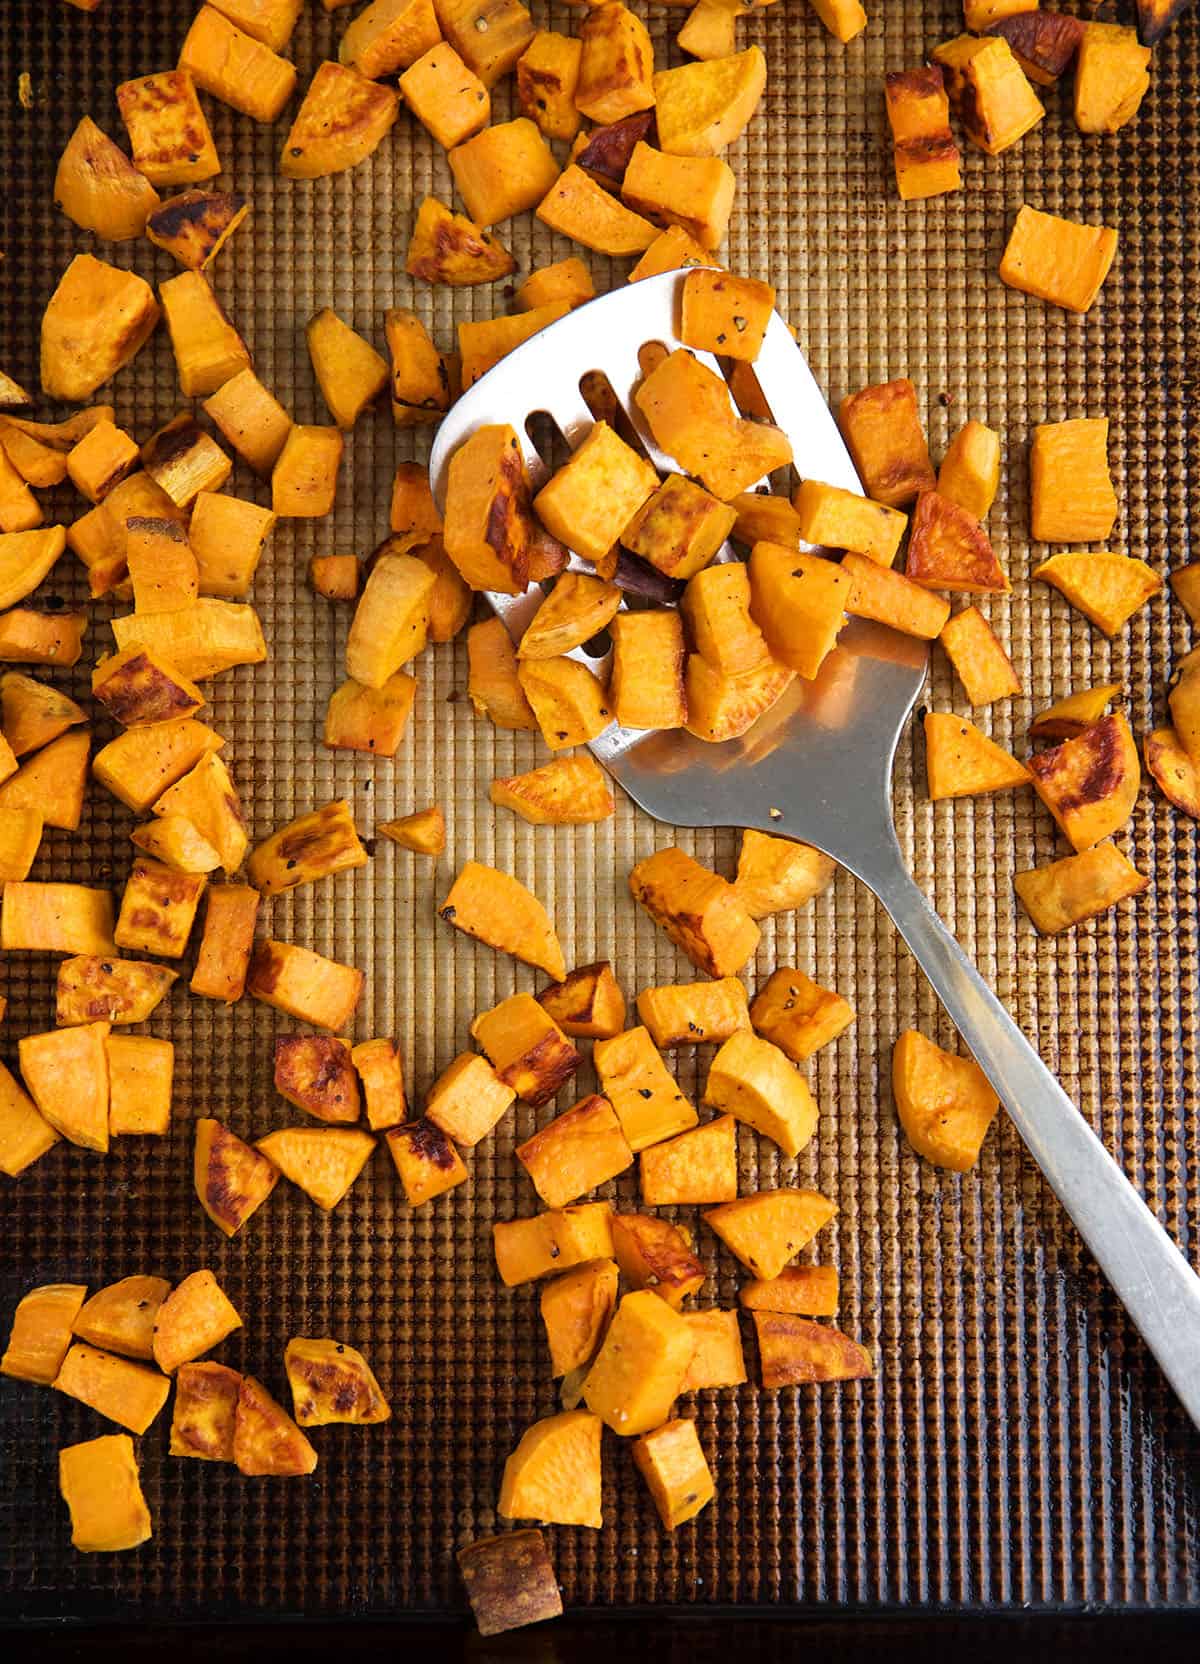 A spatula is lifting some roasted sweet potatoes from a baking sheet.